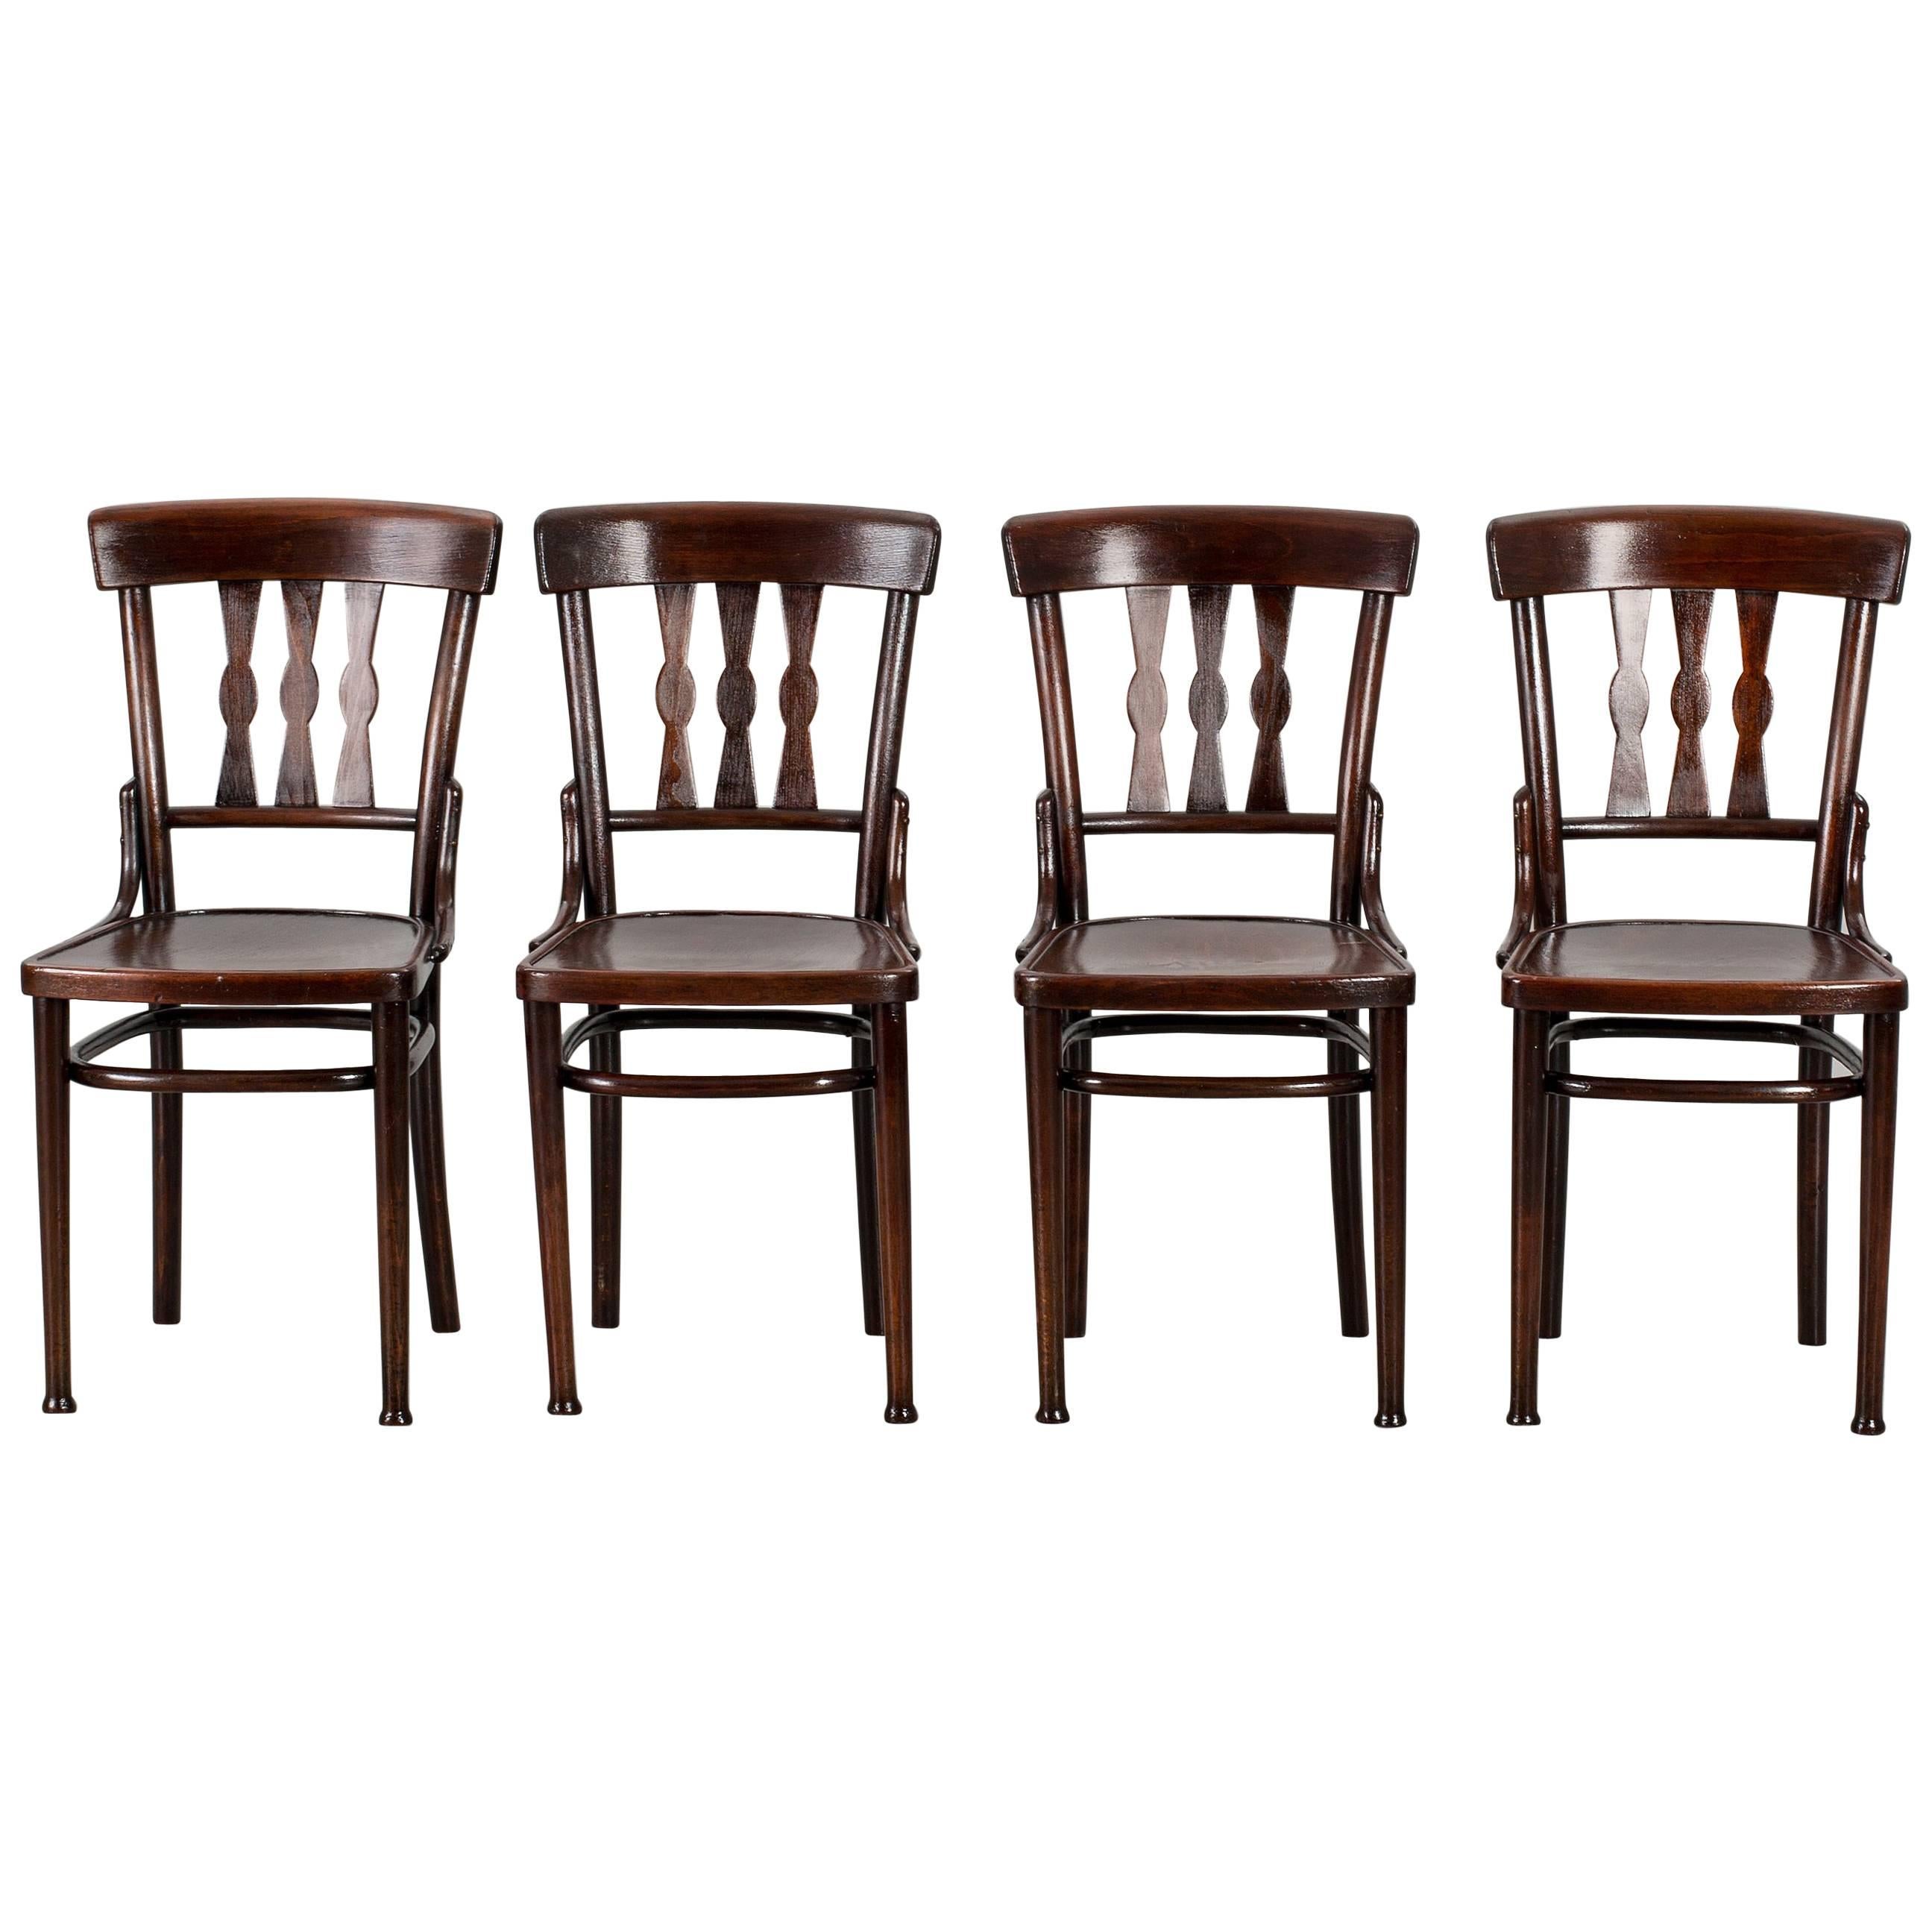 Set of Four Dining Room Chairs Attributed to Thonet